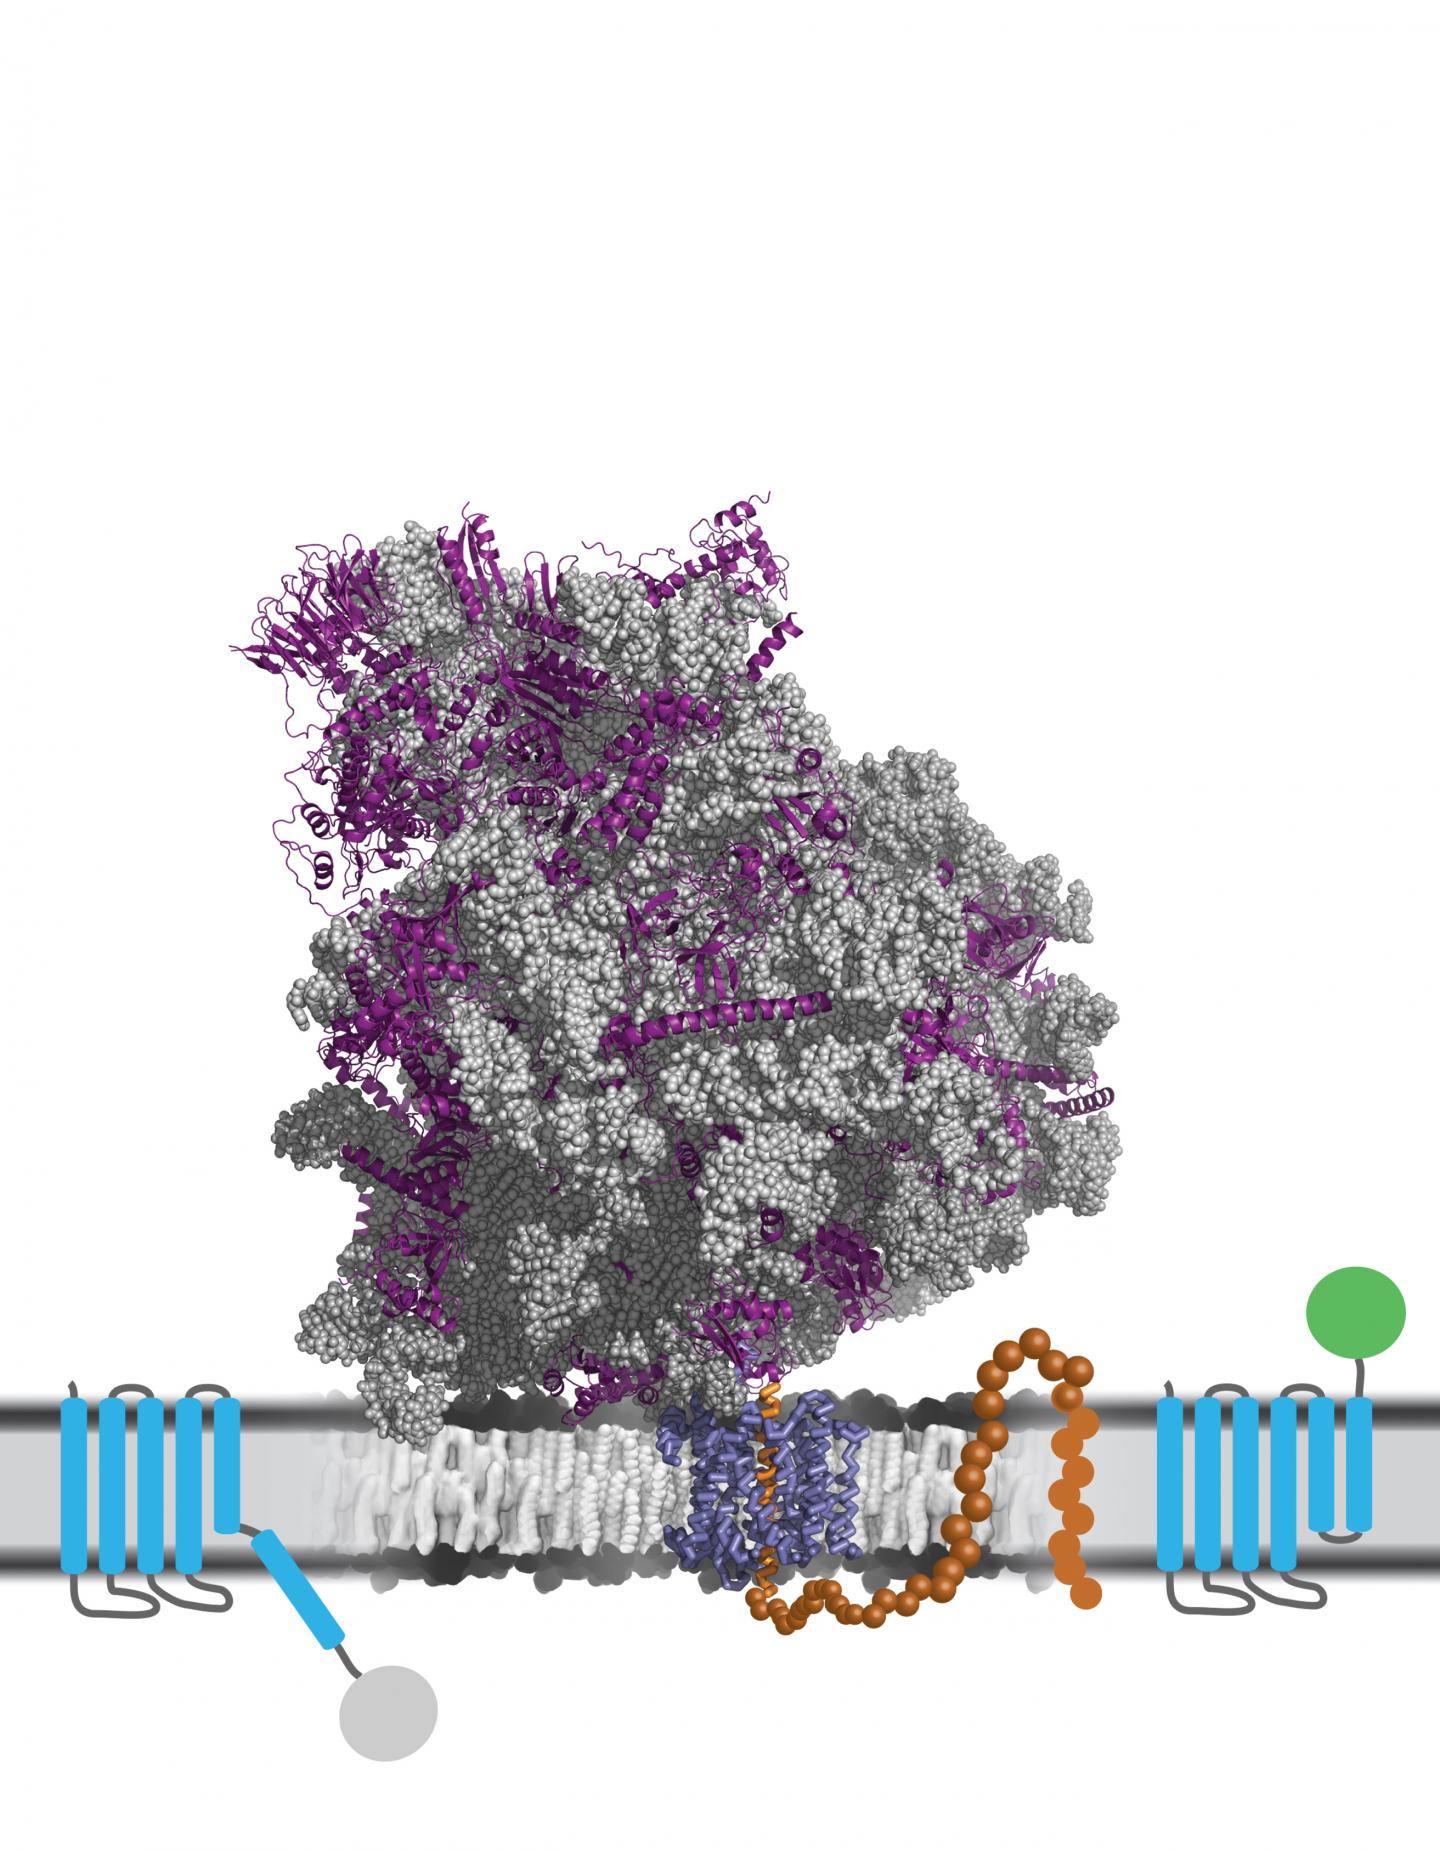 Simulating Membrane Protein Insertion